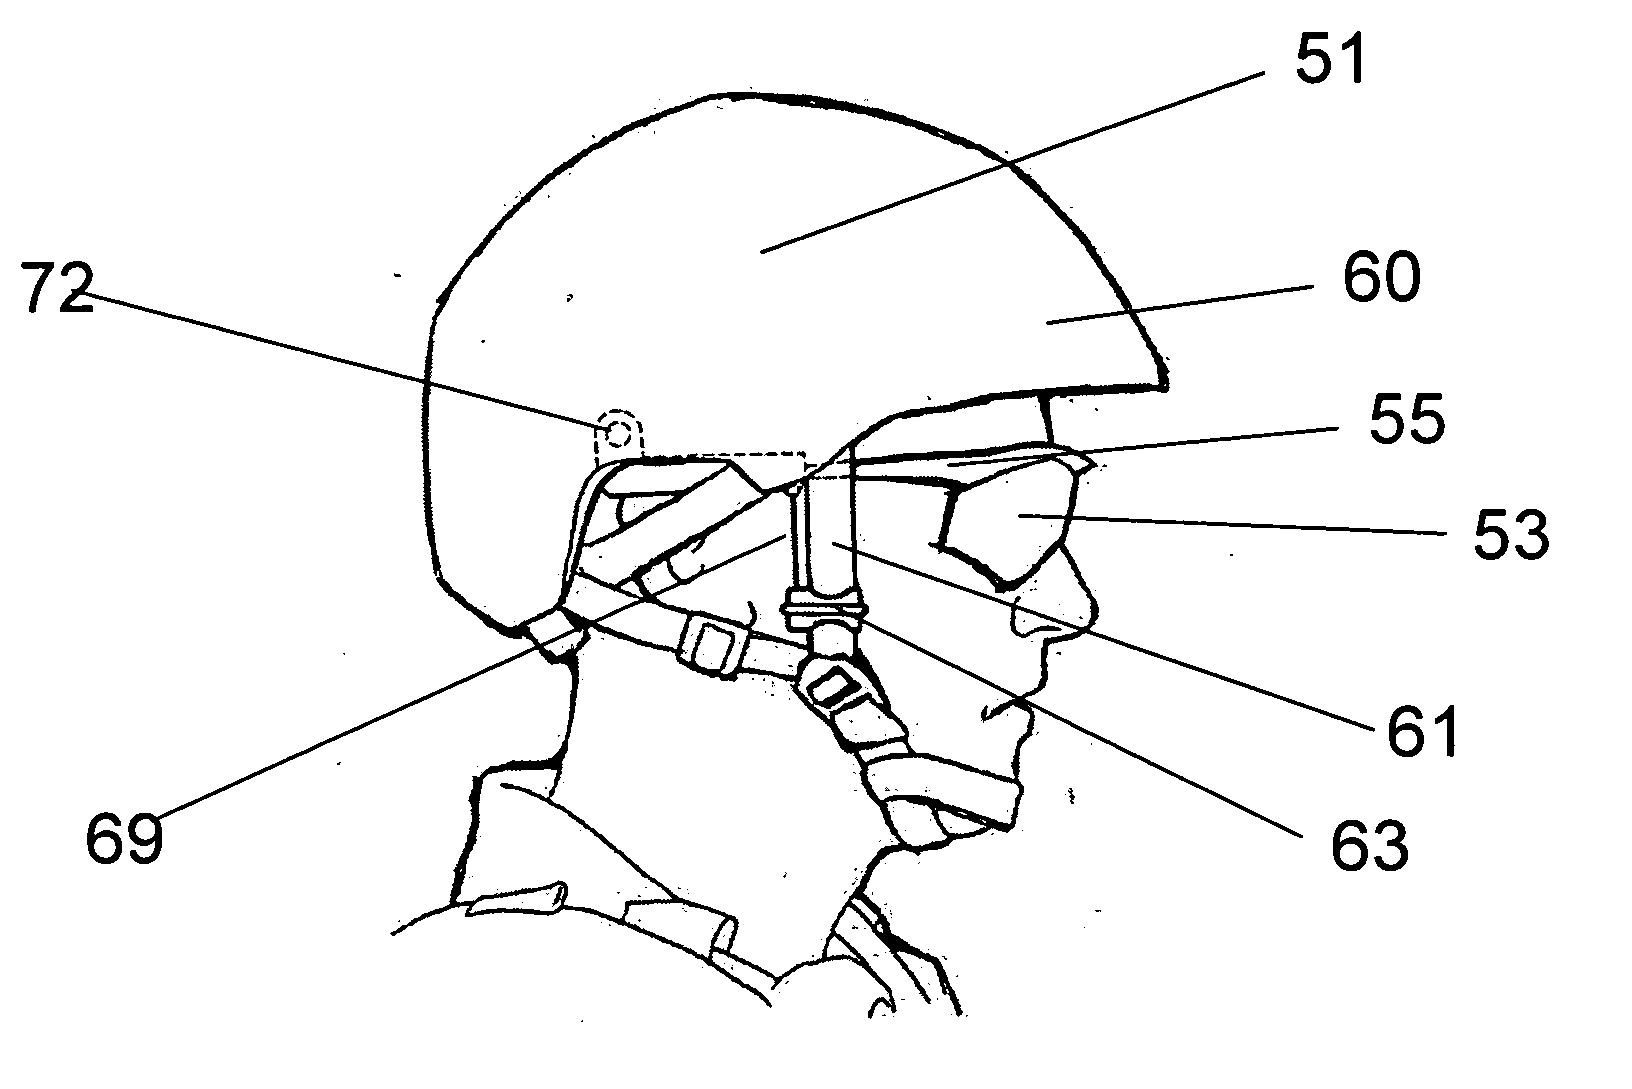 Drop-down eye protection for safety helmets